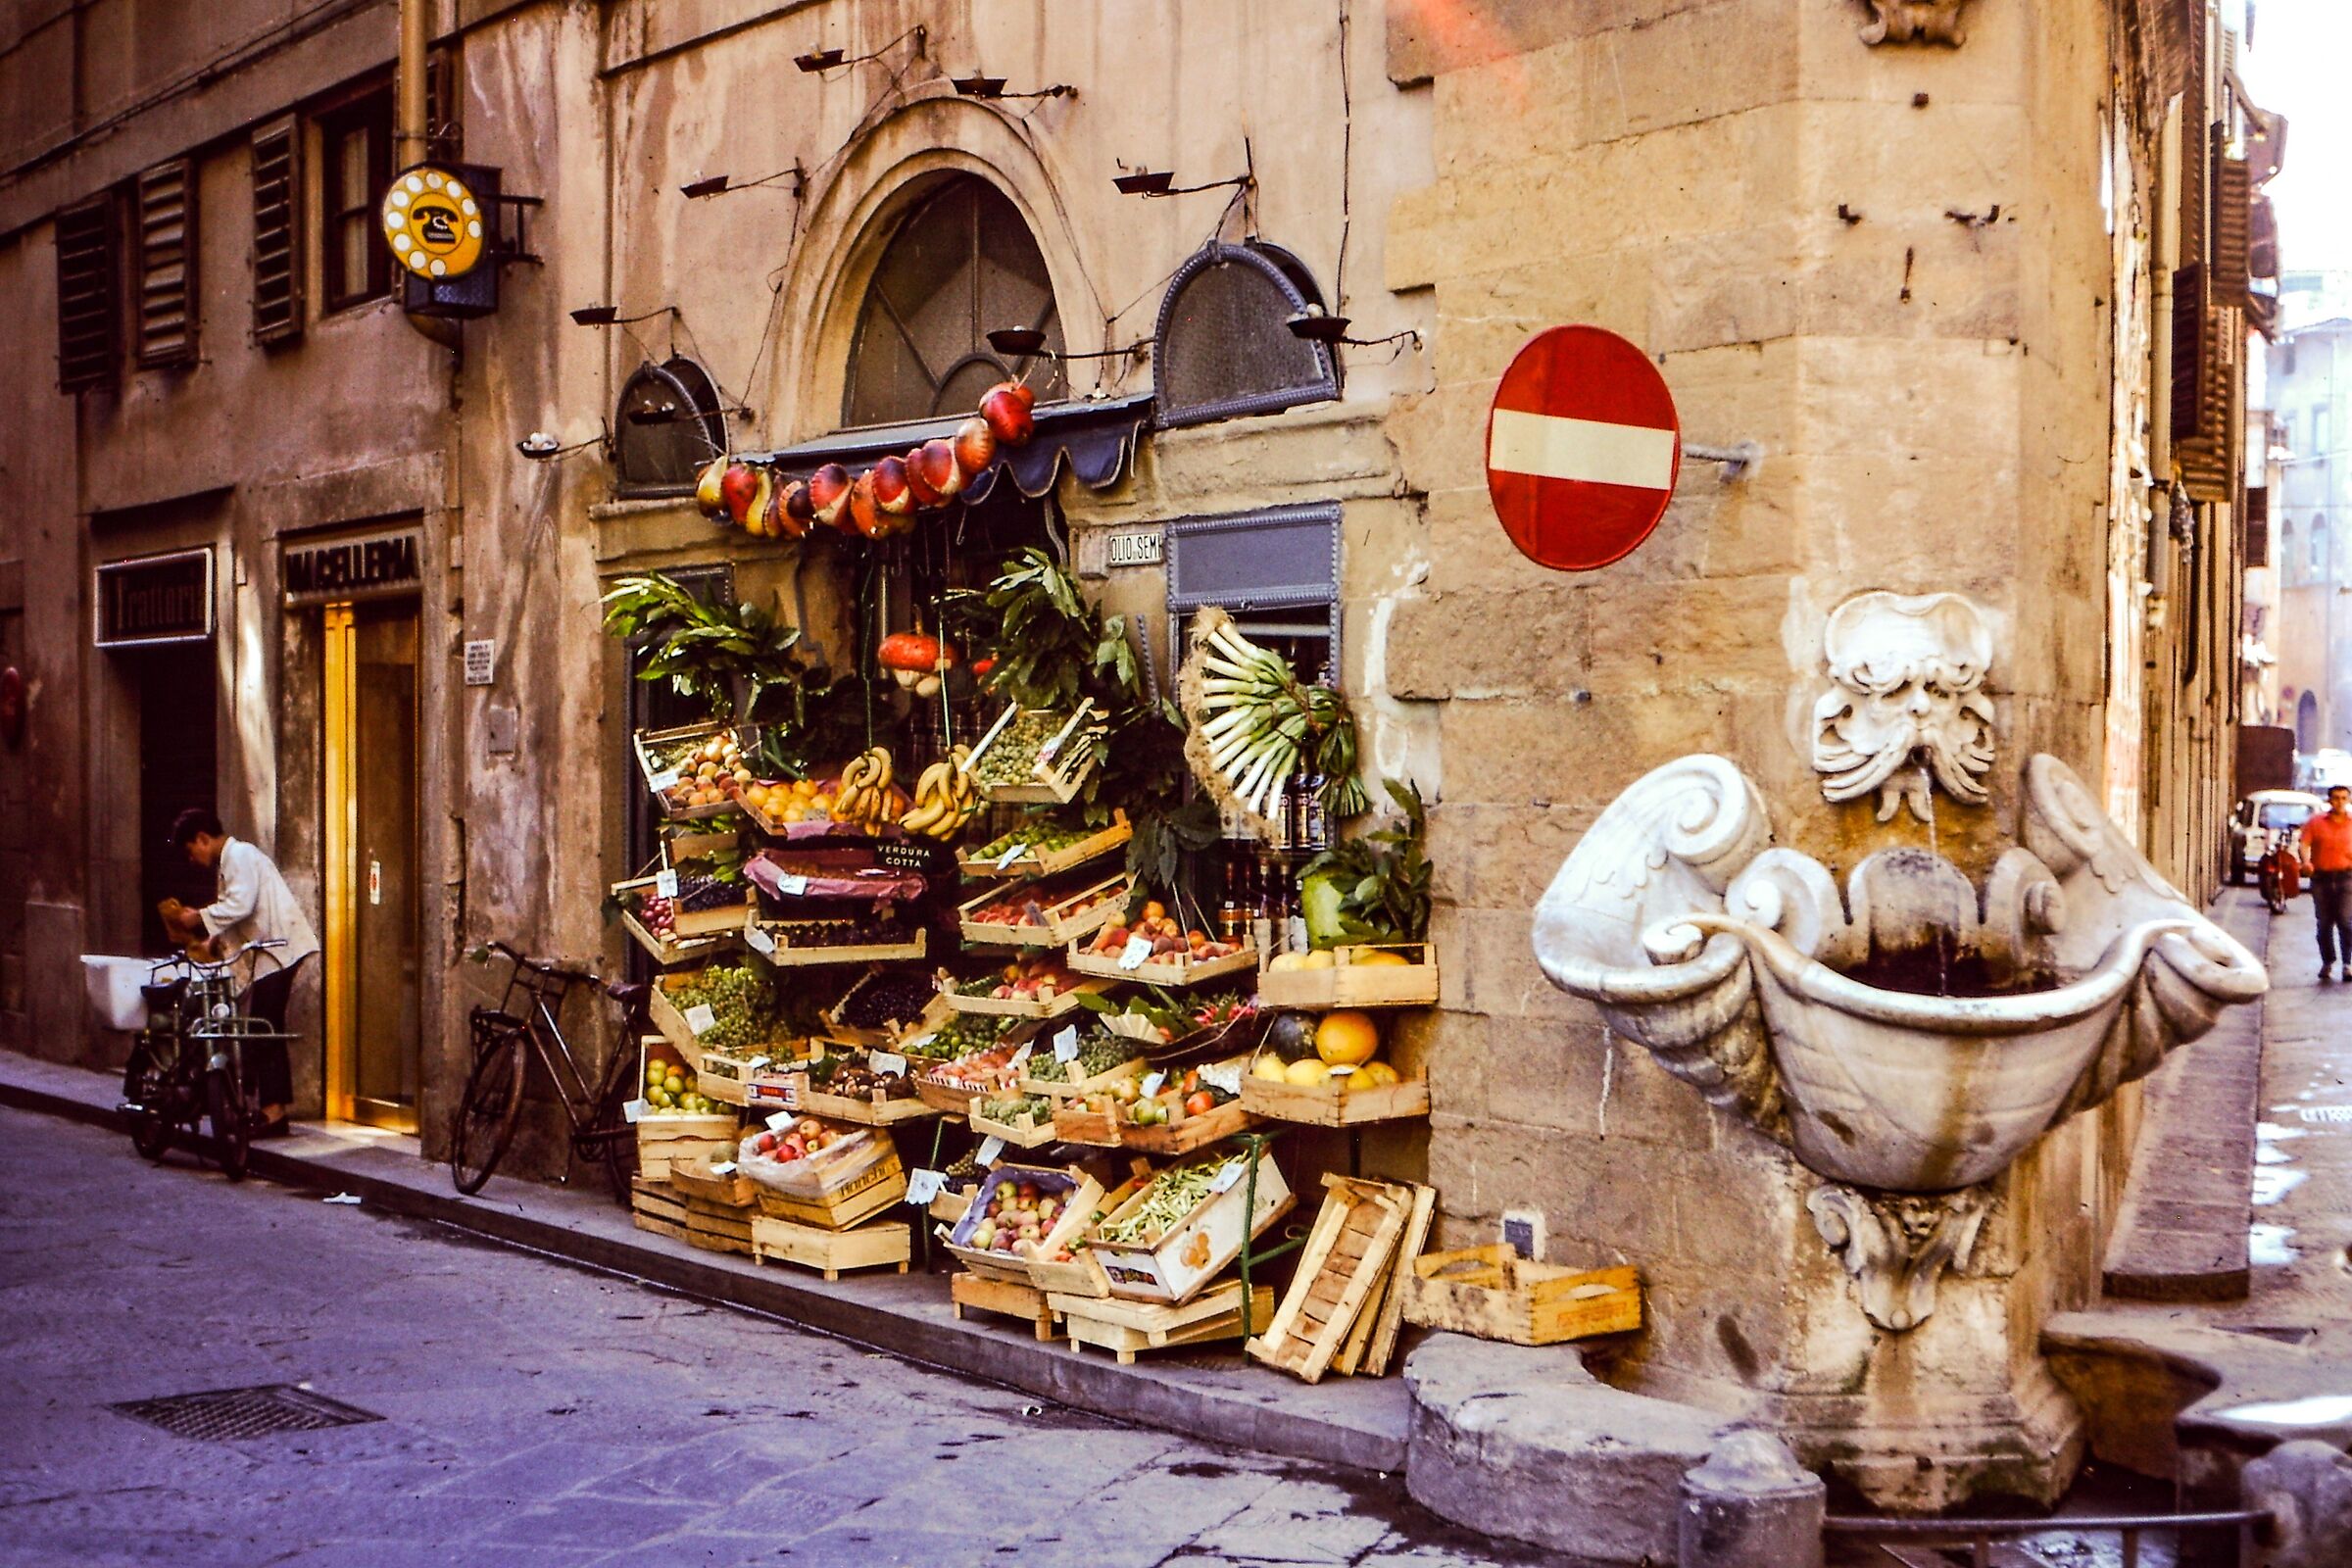 Through the streets of Florence in '68...